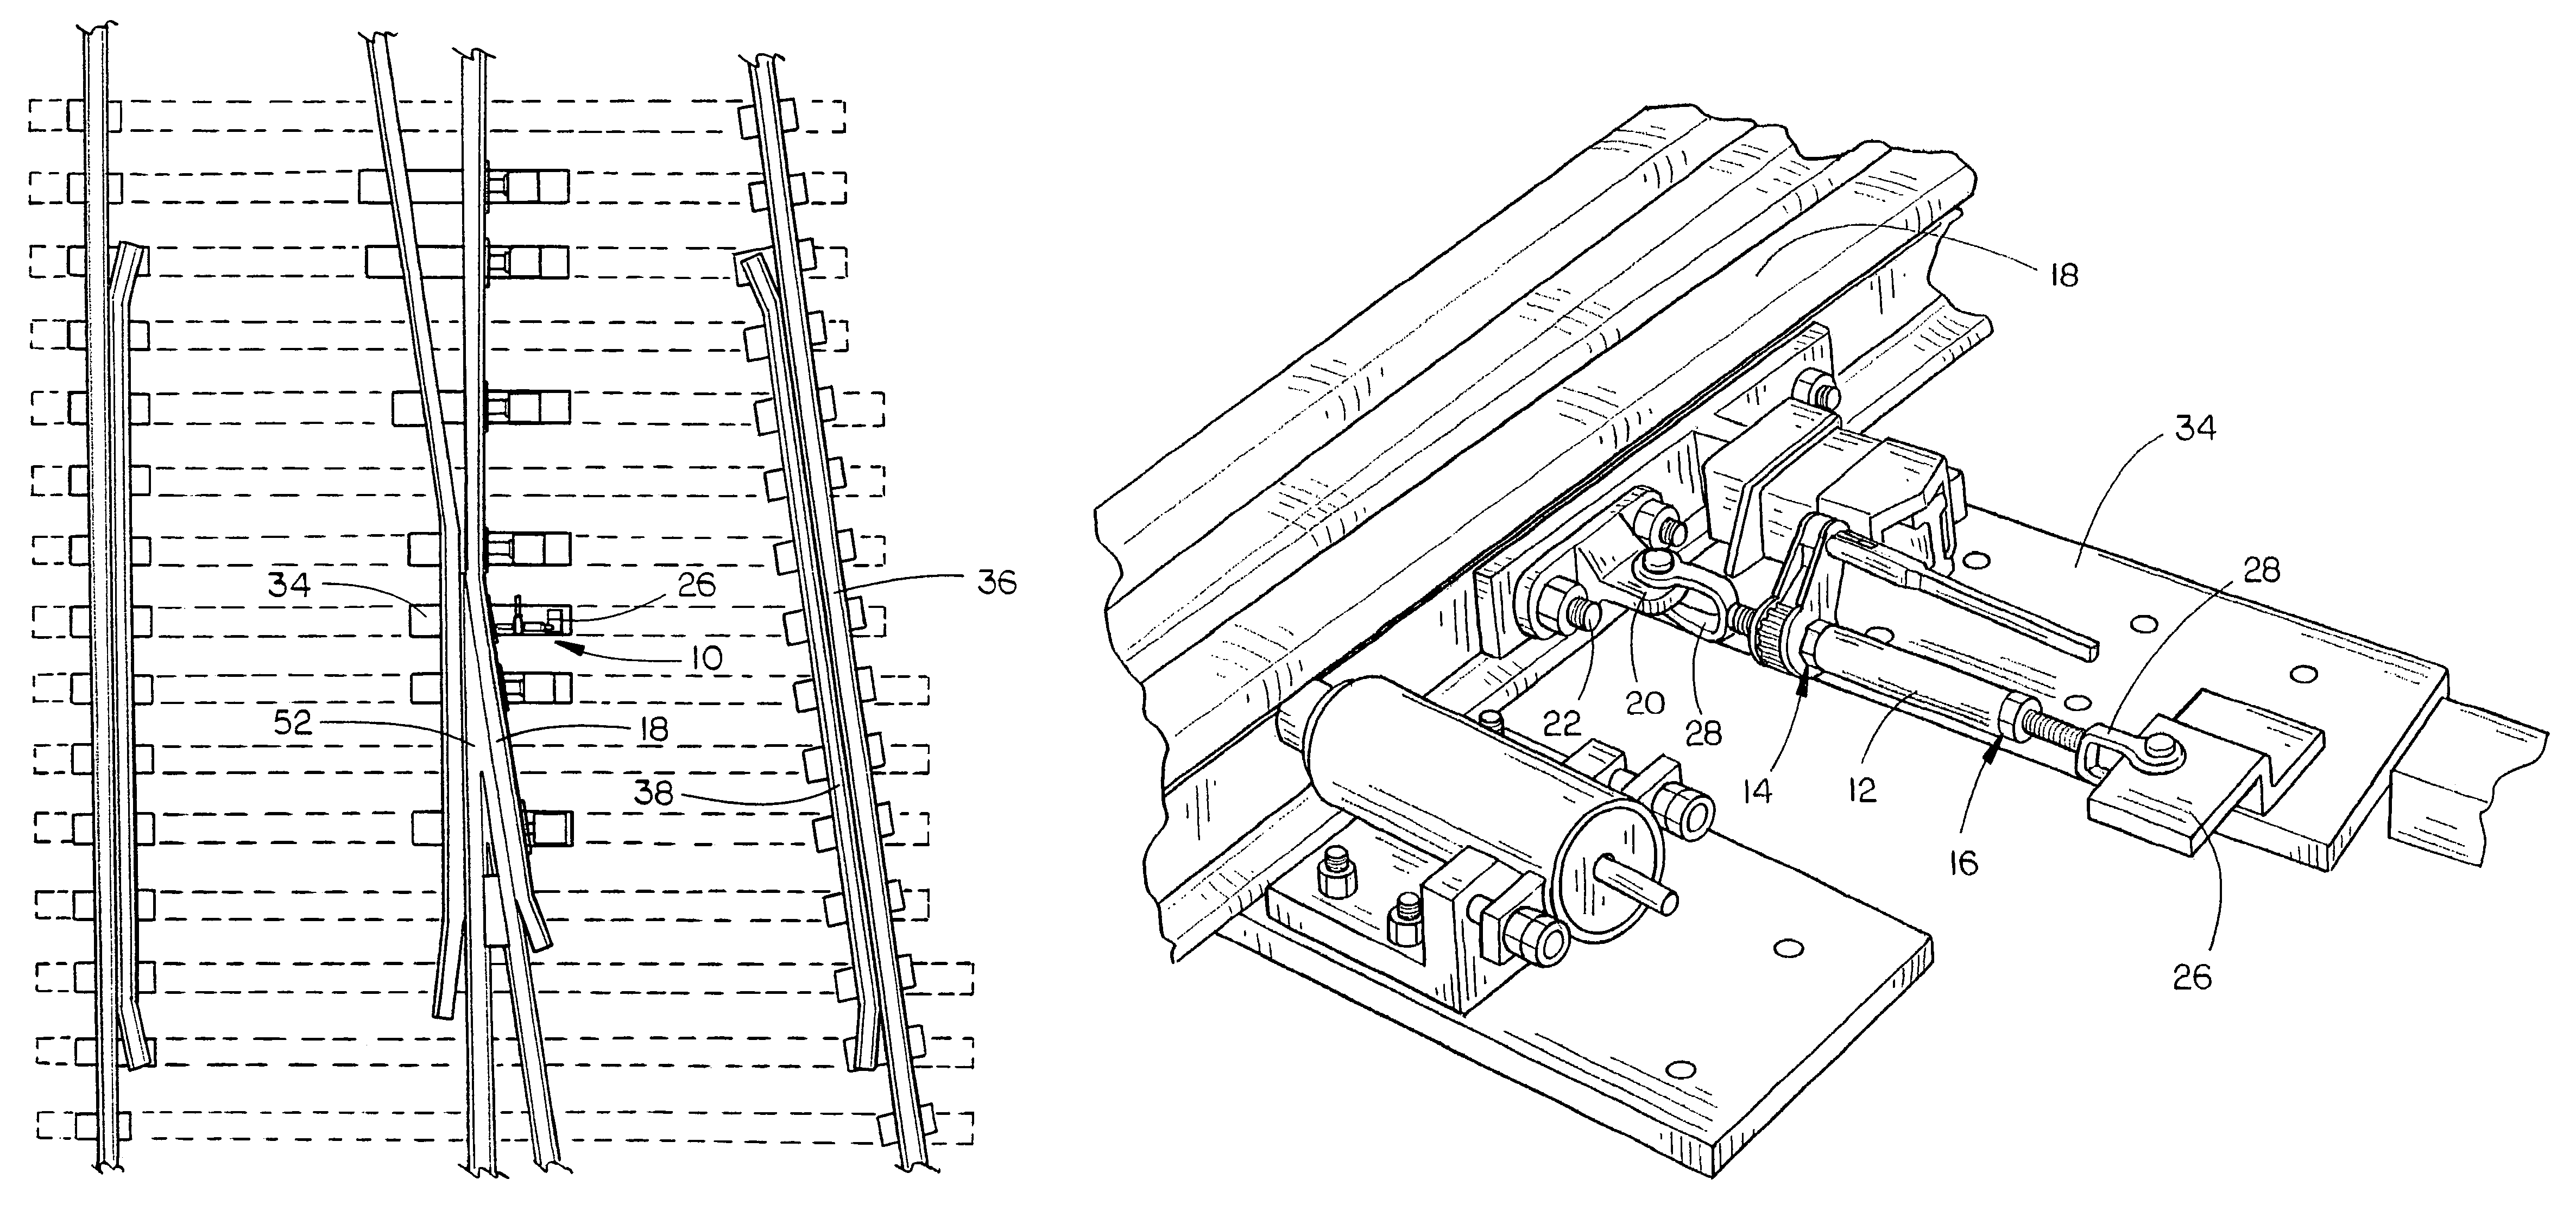 Method and system for opening and securing a railroad frog